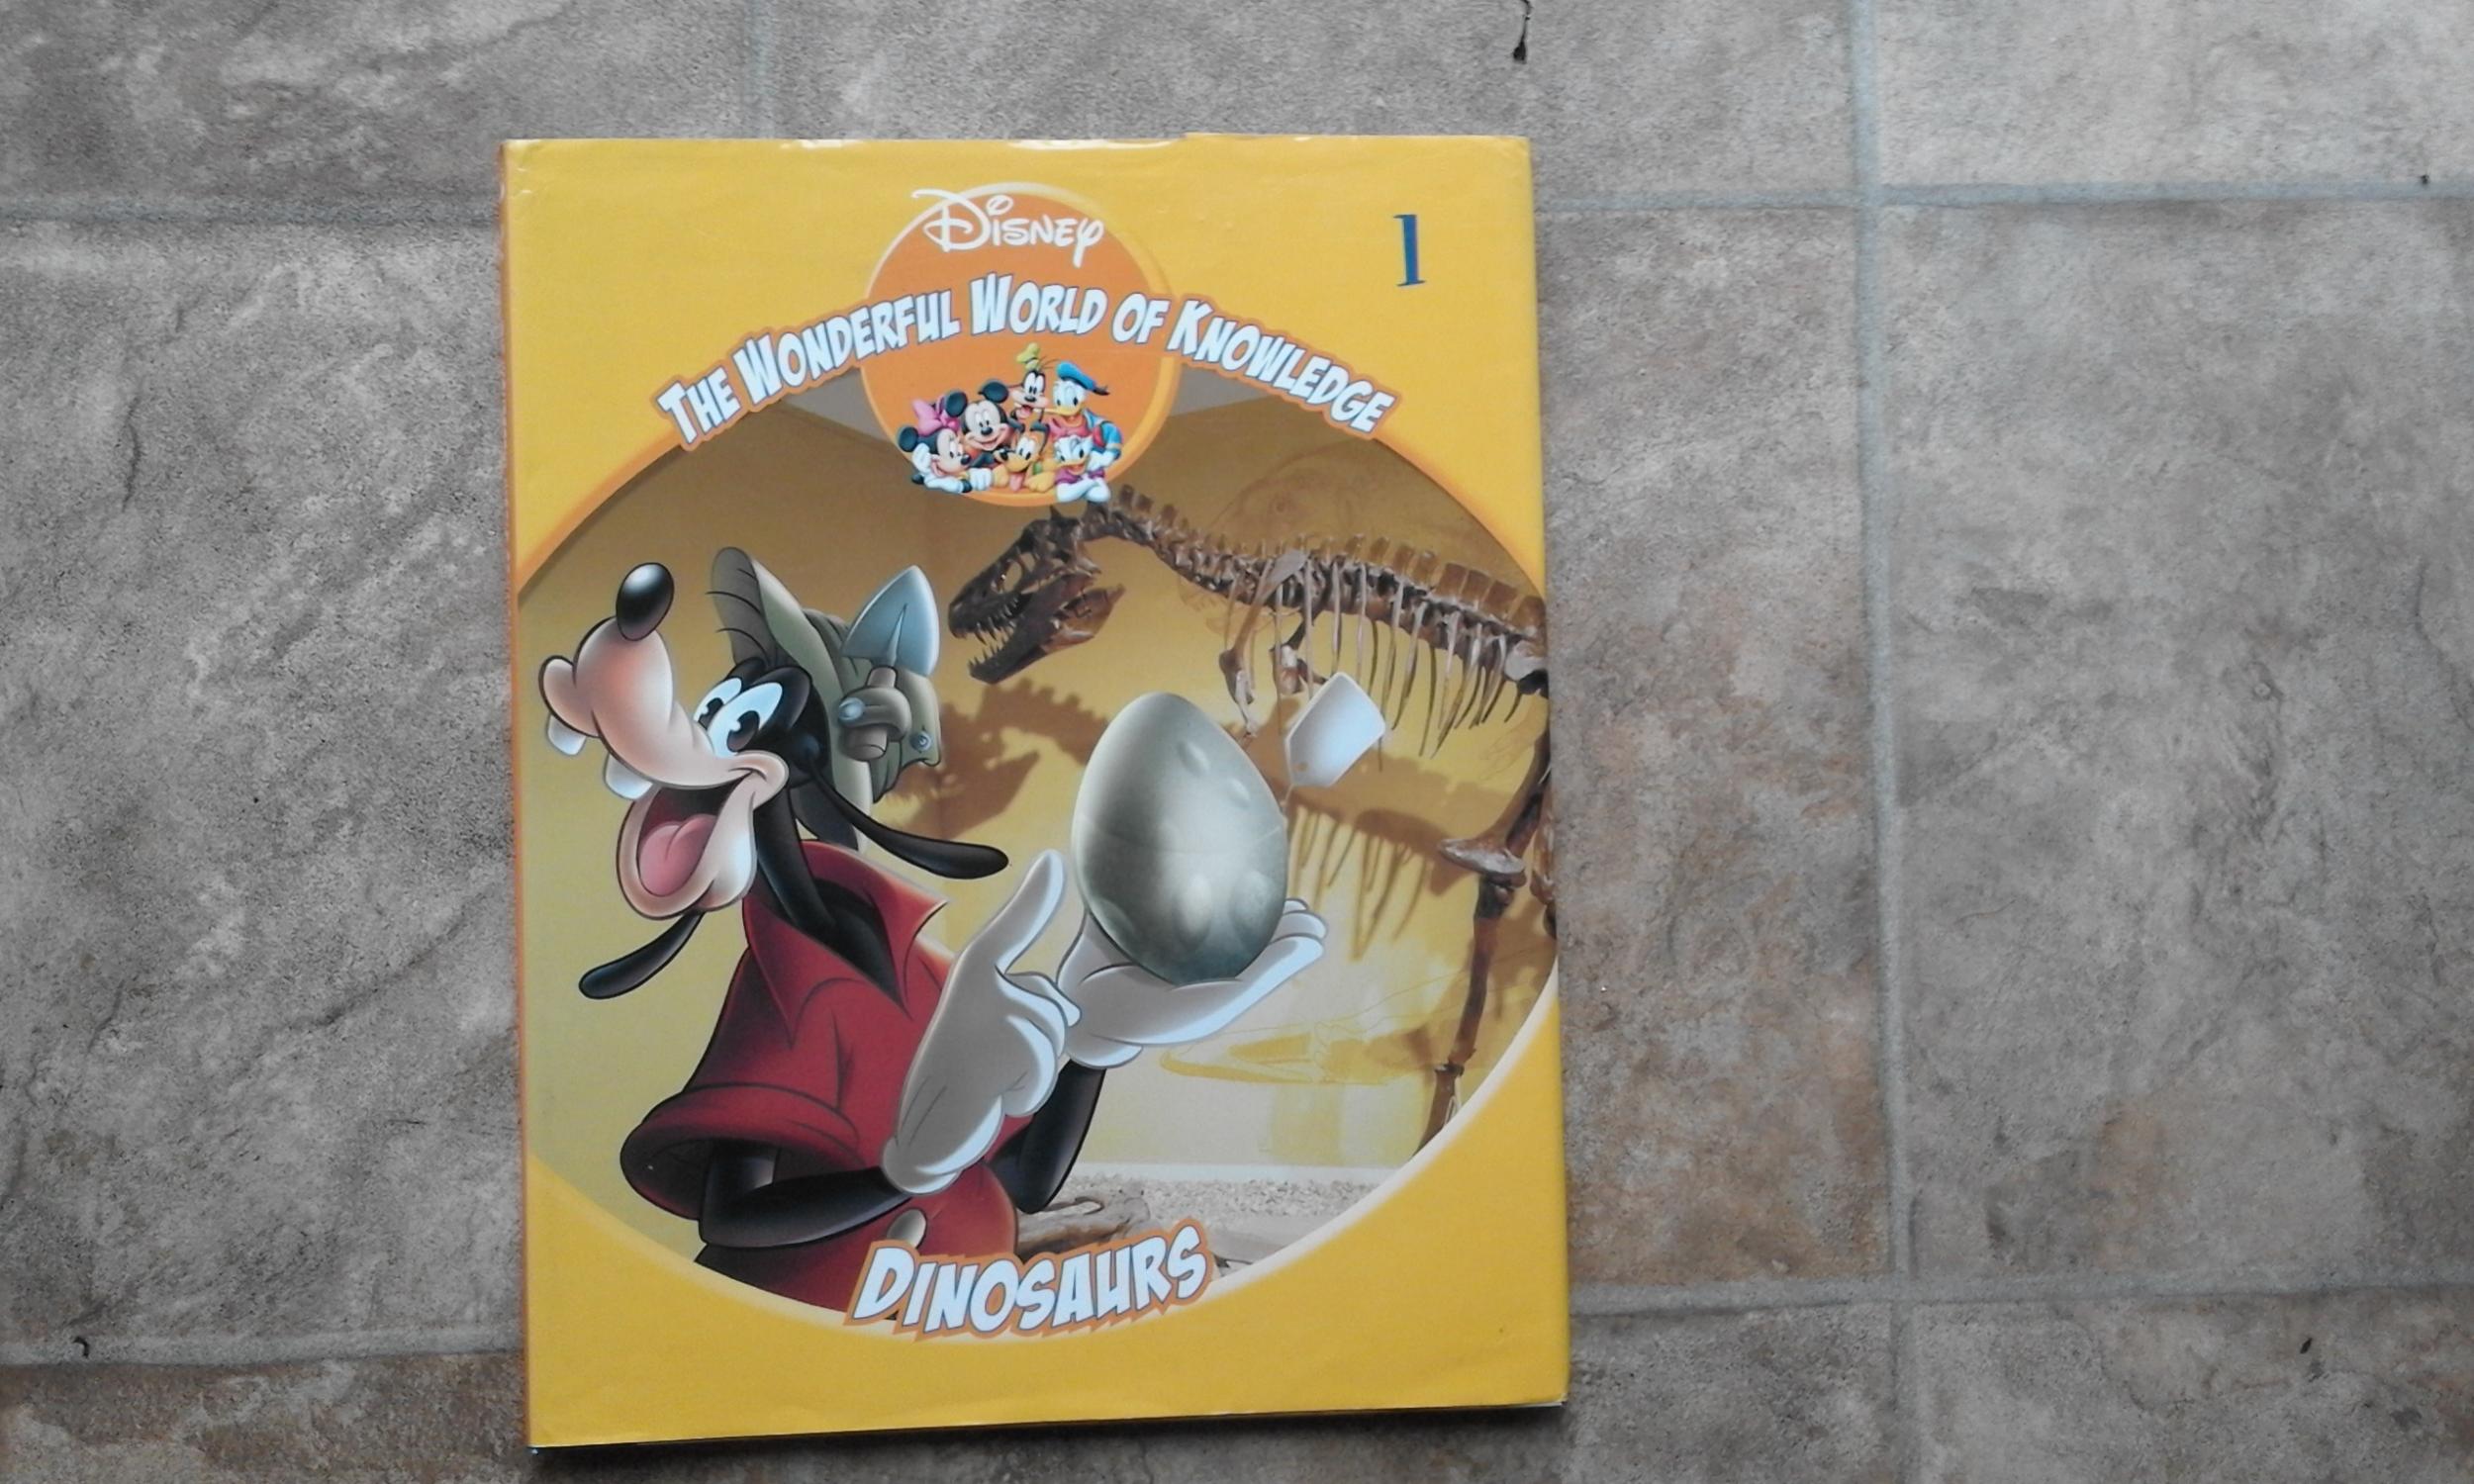 Wonderful　of　just　New　World　-Dinosaurs:　Knowledge　(2008)　Hardcover　books　Disney　The